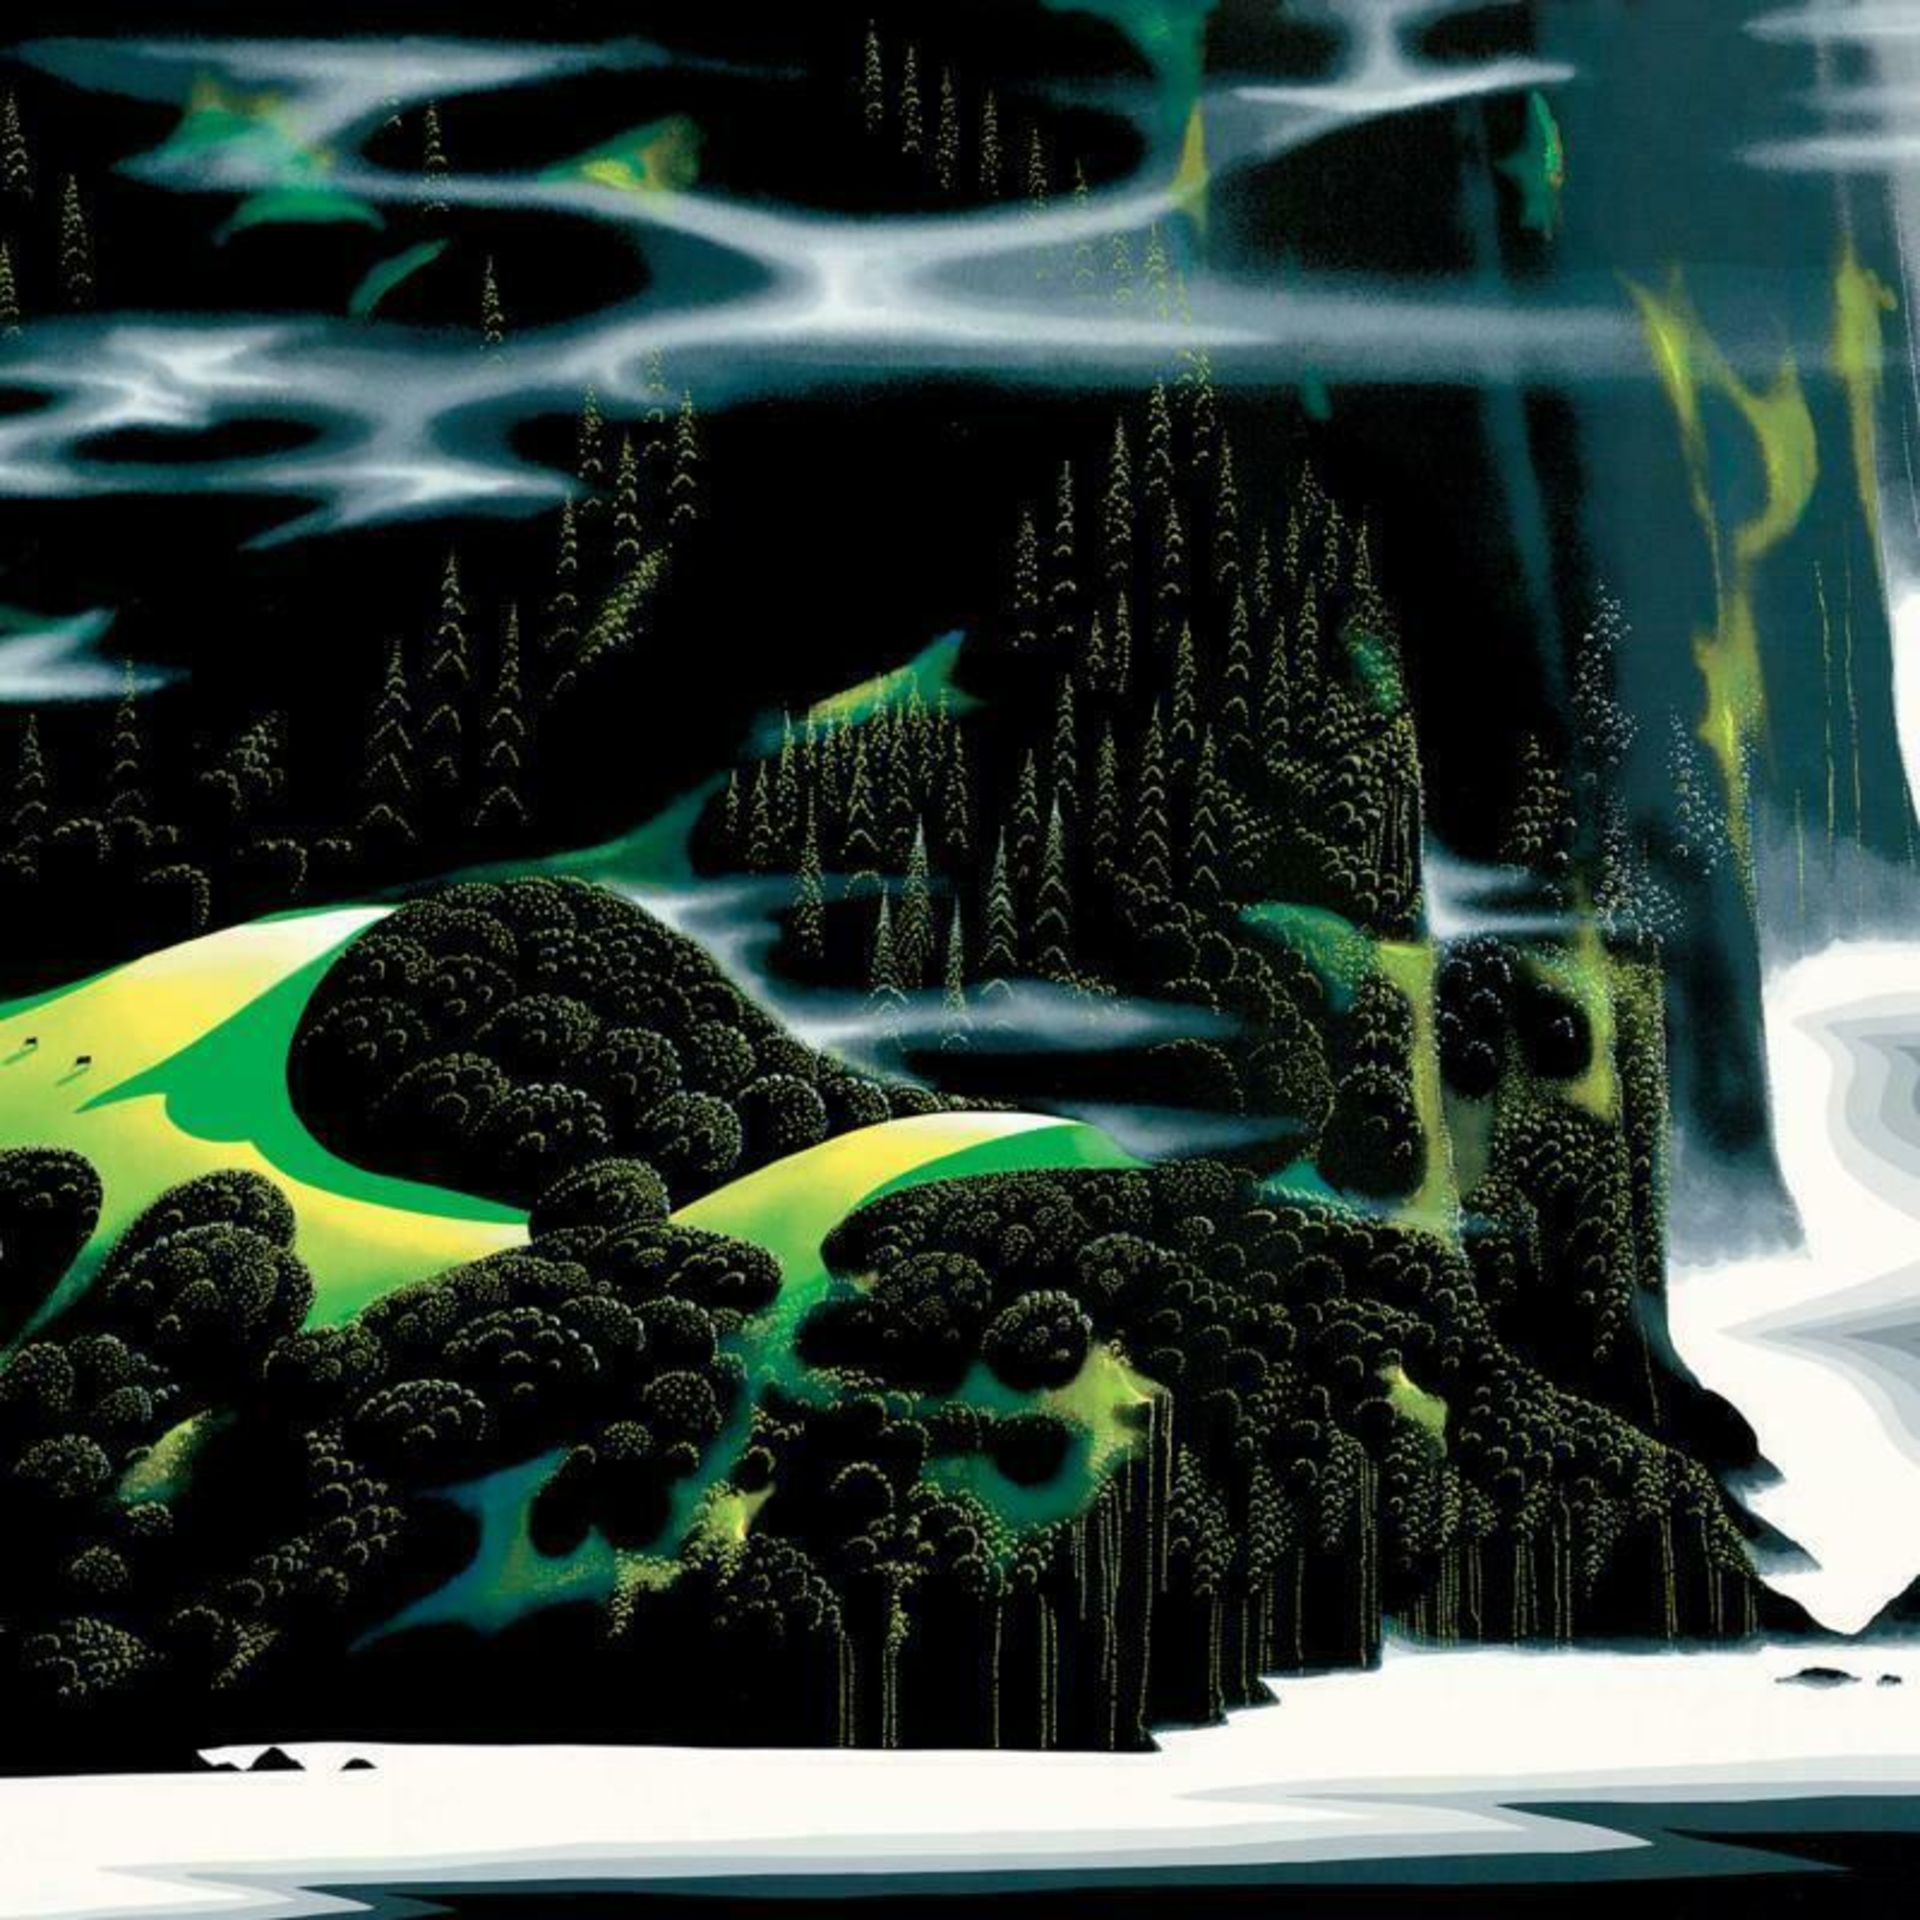 Eyvind Earle (1916-2000), "Haze Of Early Spring" Limited Edition Serigraph on Pa - Image 2 of 2